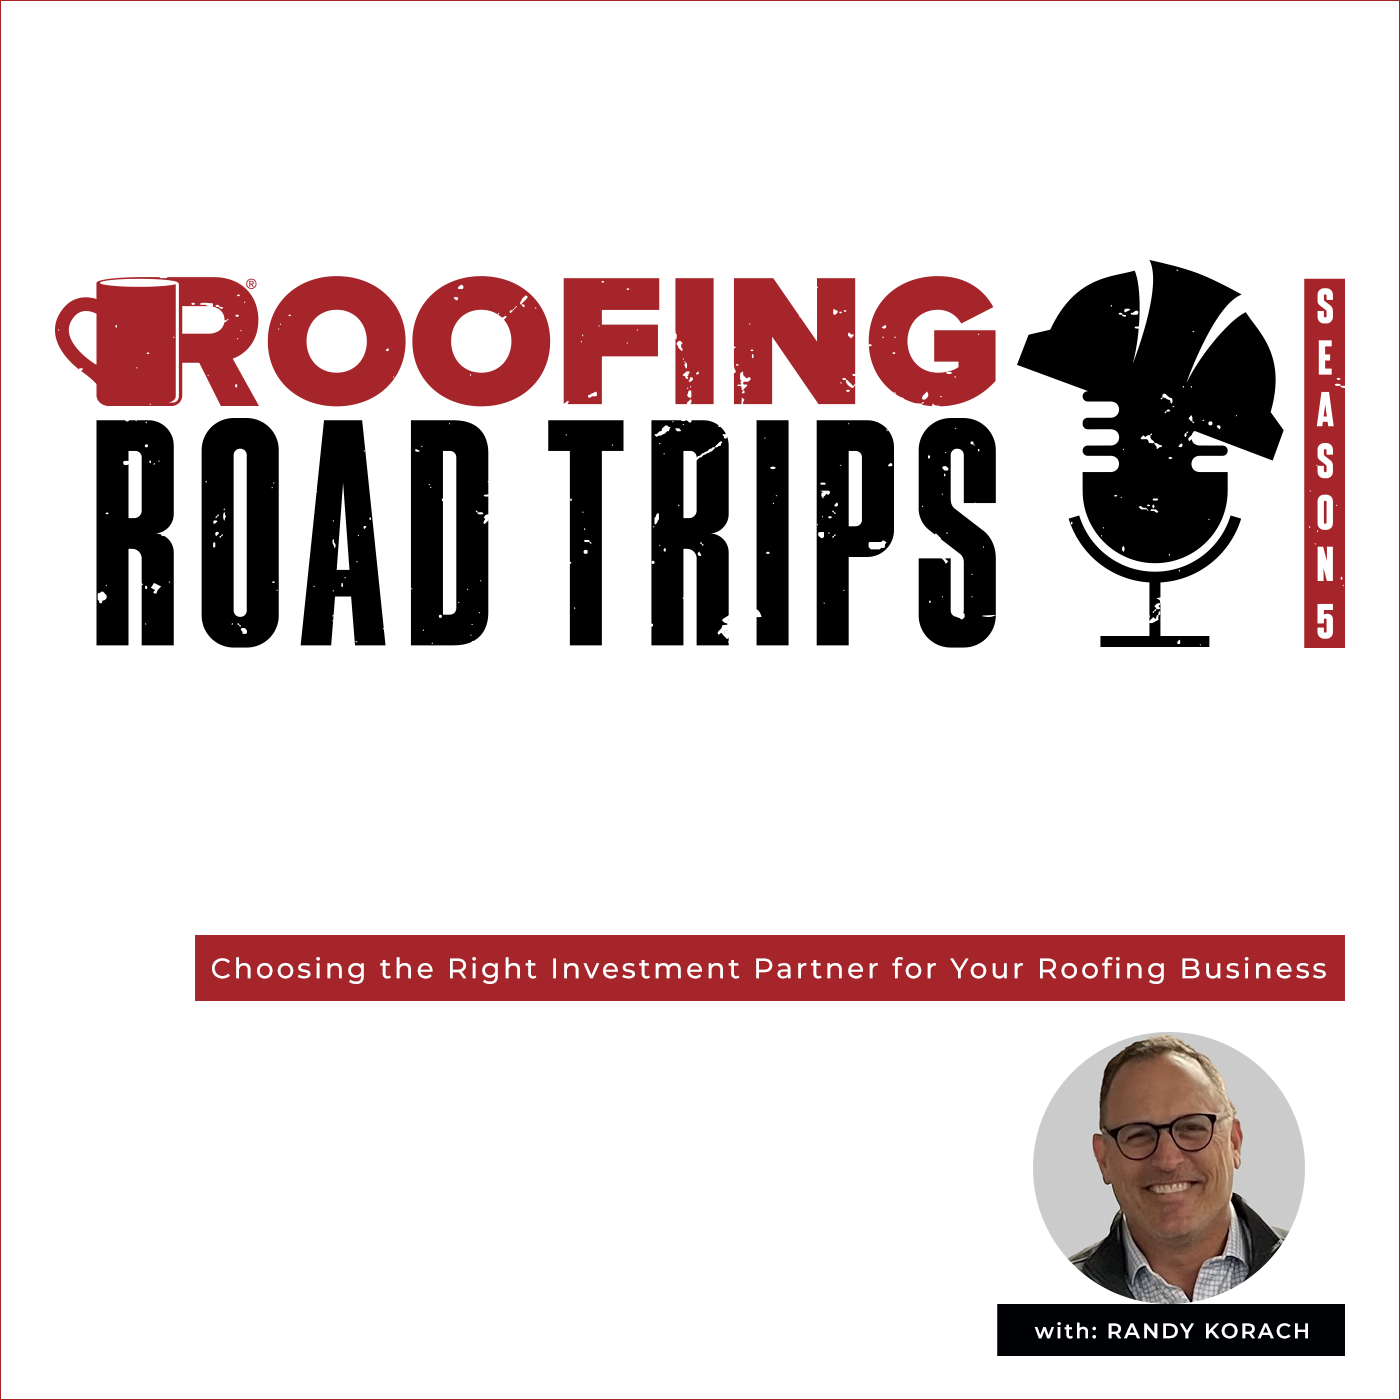 Randy Korach - Choosing the Right Investment Partner for Your Roofing Business